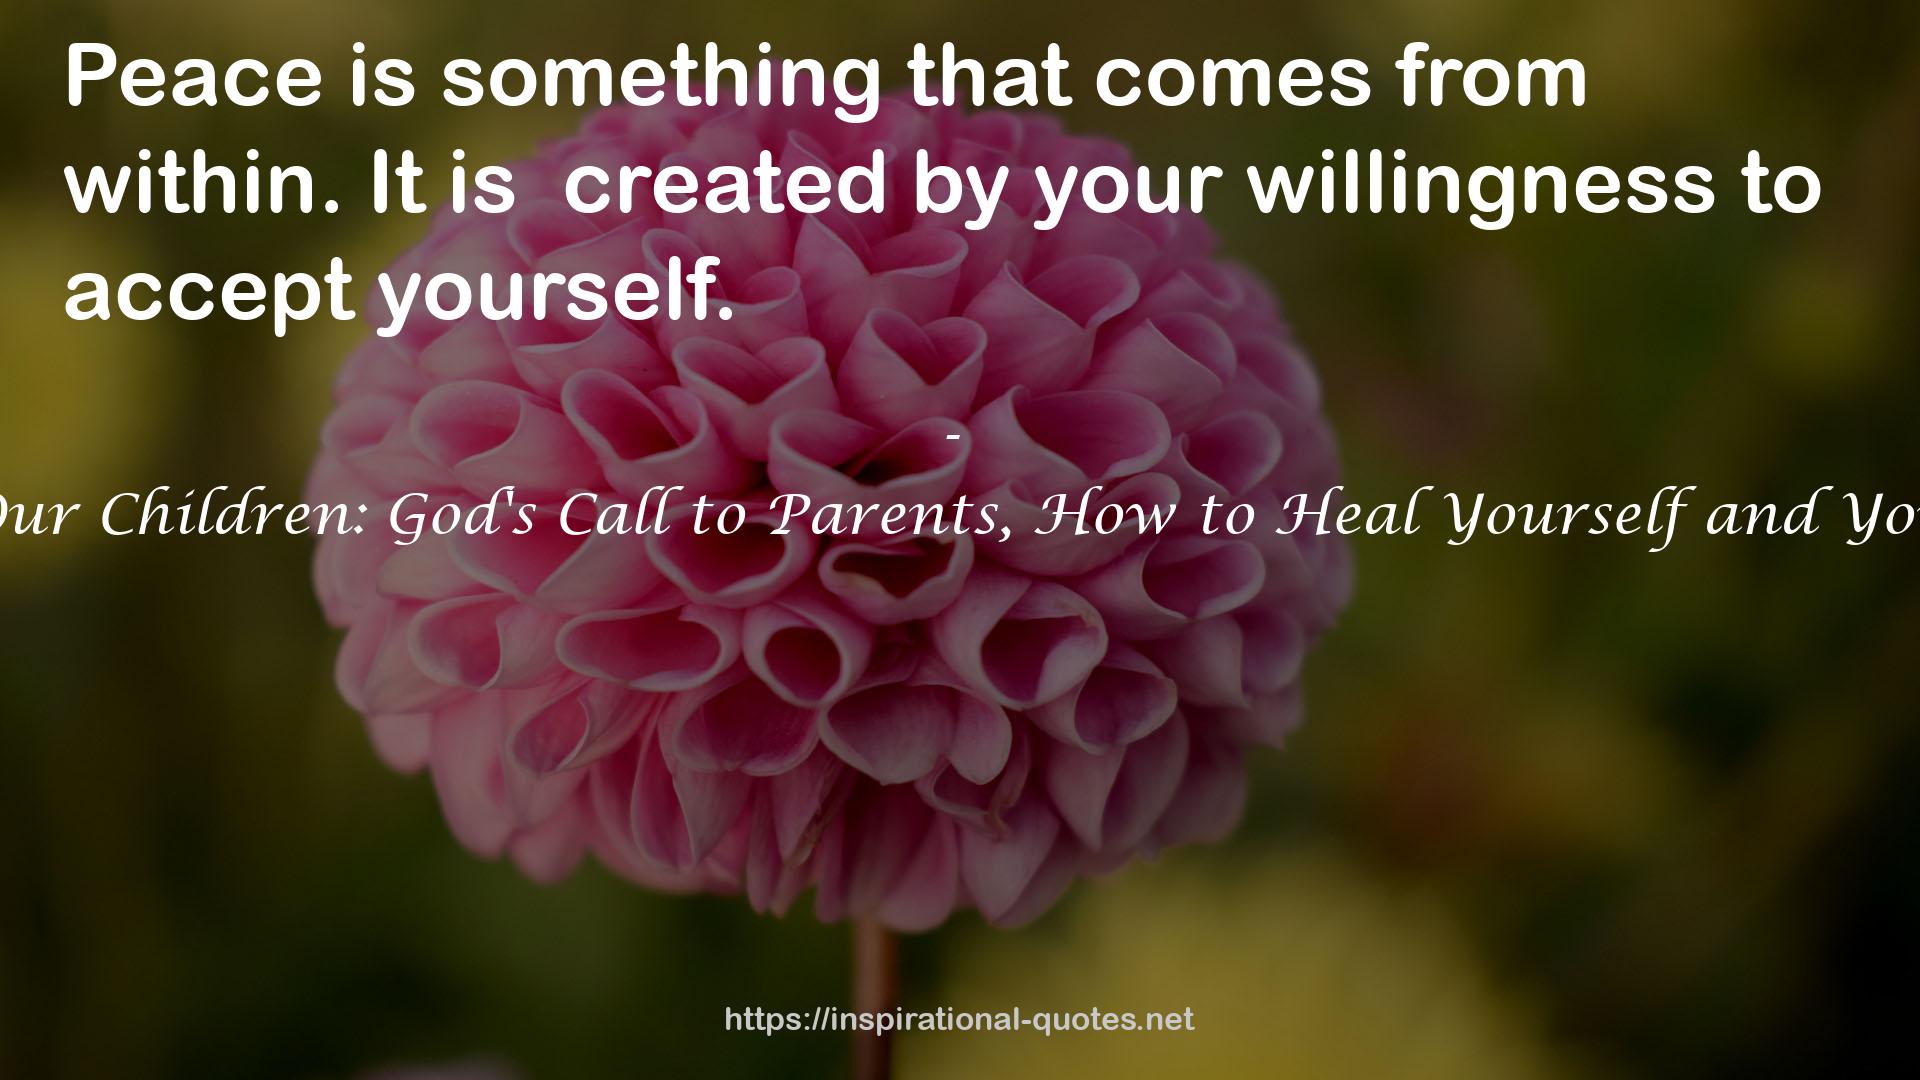 Empower Our Children: God's Call to Parents, How to Heal Yourself and Your Children QUOTES